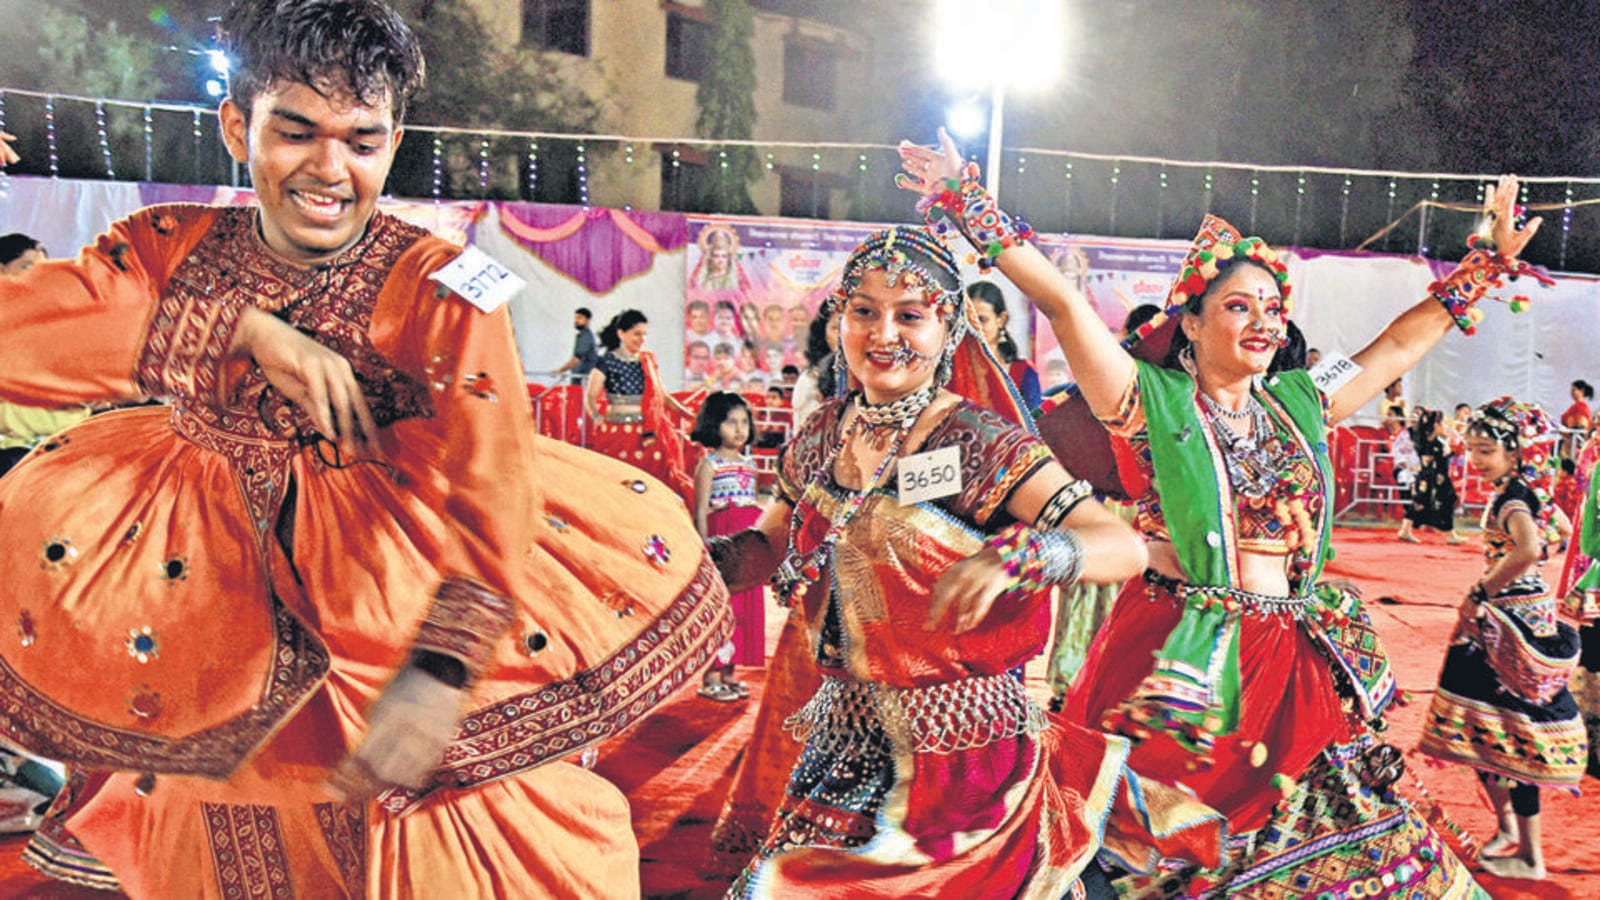 Mandals set the stage for city to sway this Navratri | Mumbai news ...